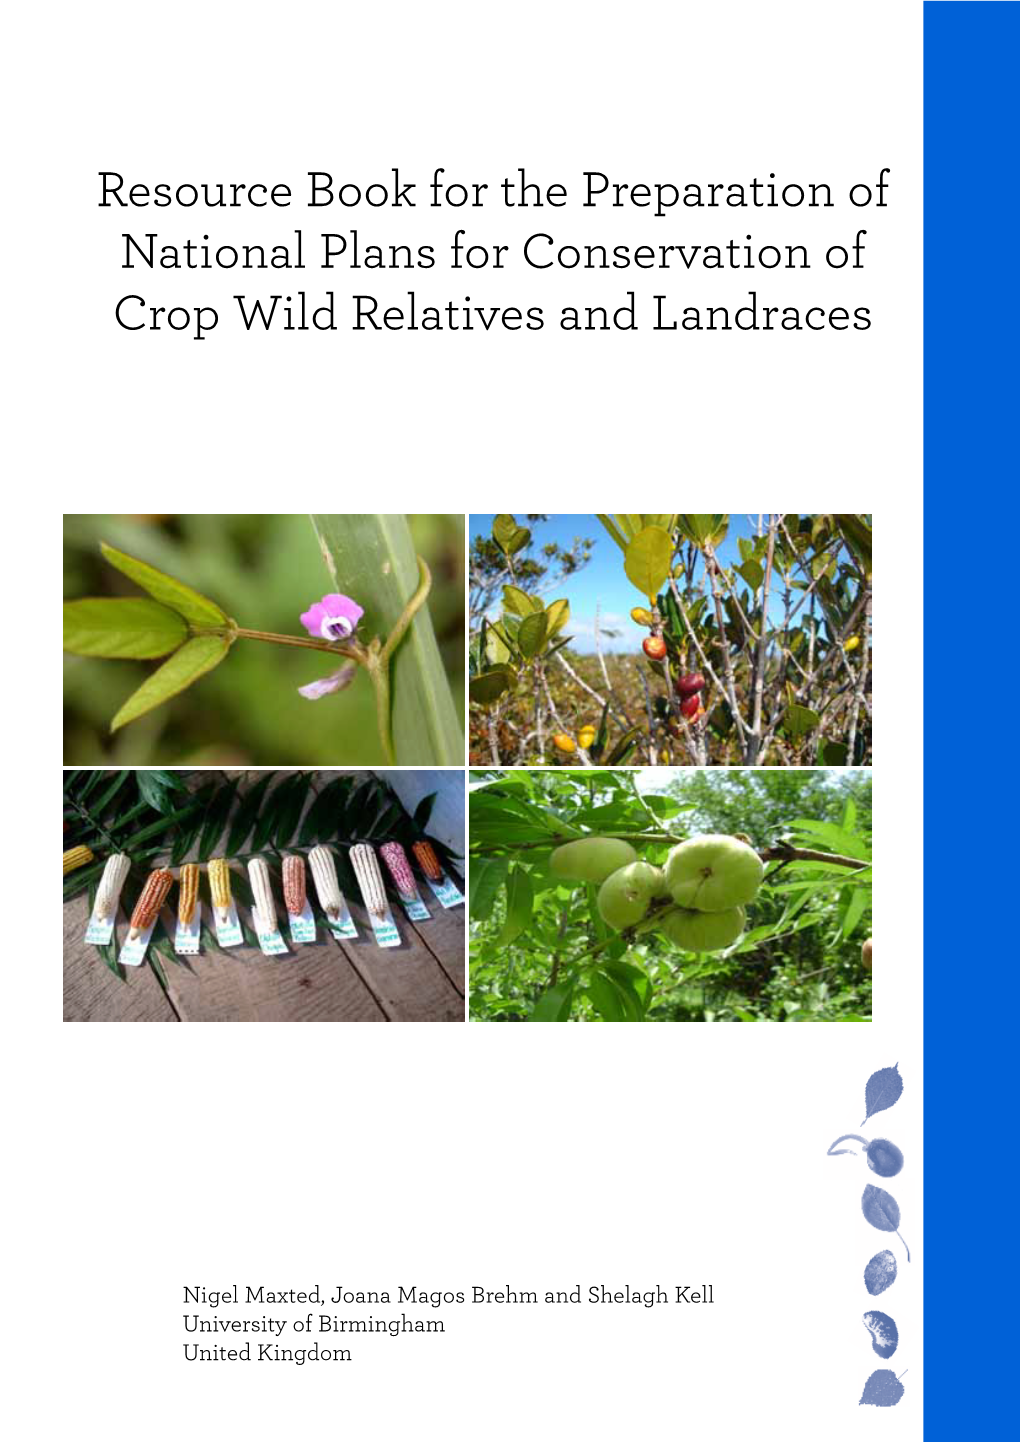 Resource Book for the Preparation of National Plans for Conservation of Crop Wild Relatives and Landraces